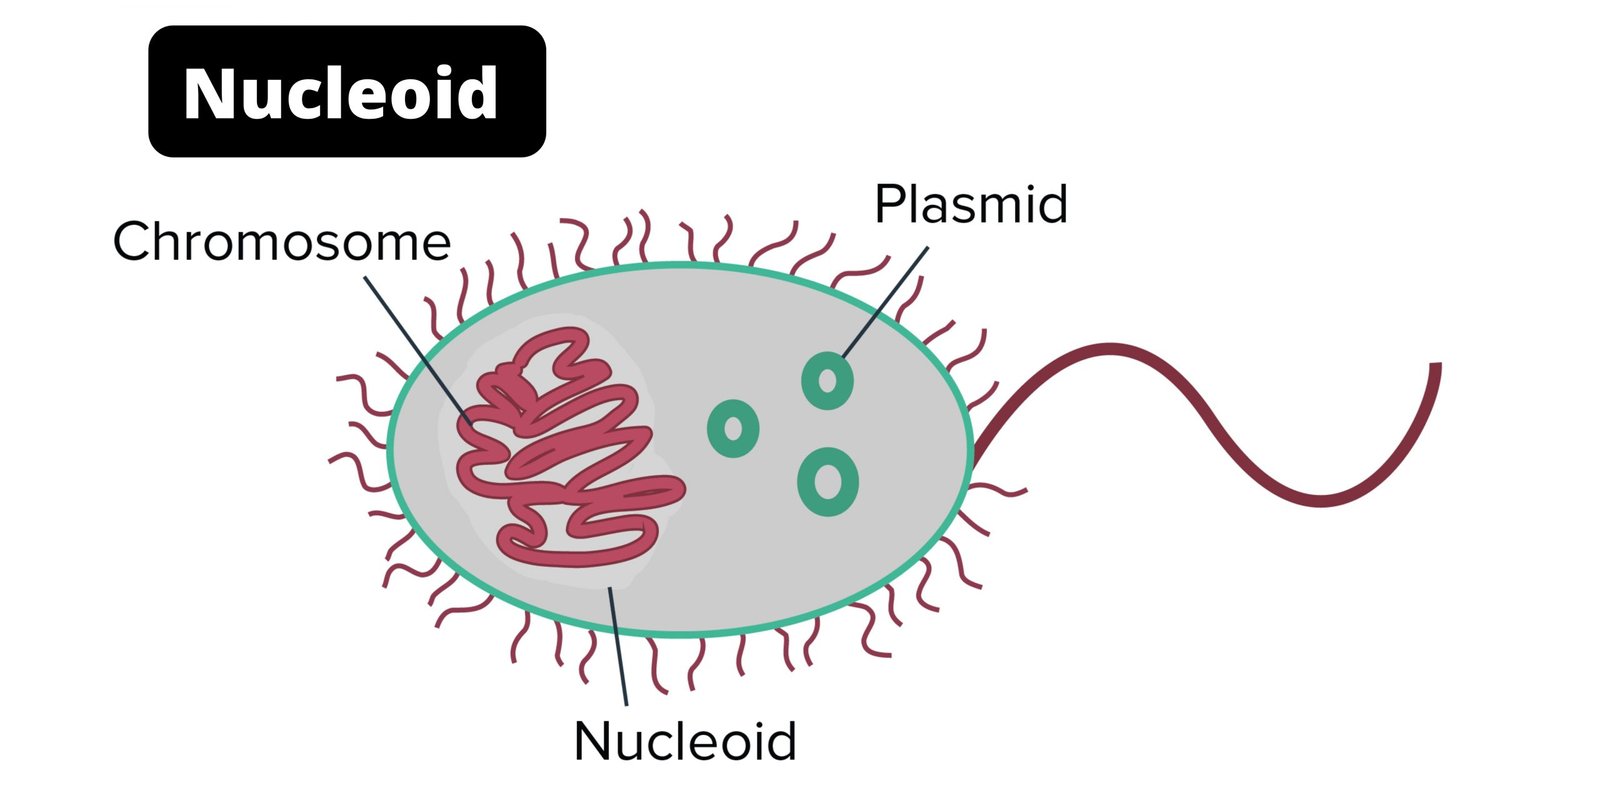 Nucleoid - Definition, Functions, Characteristics